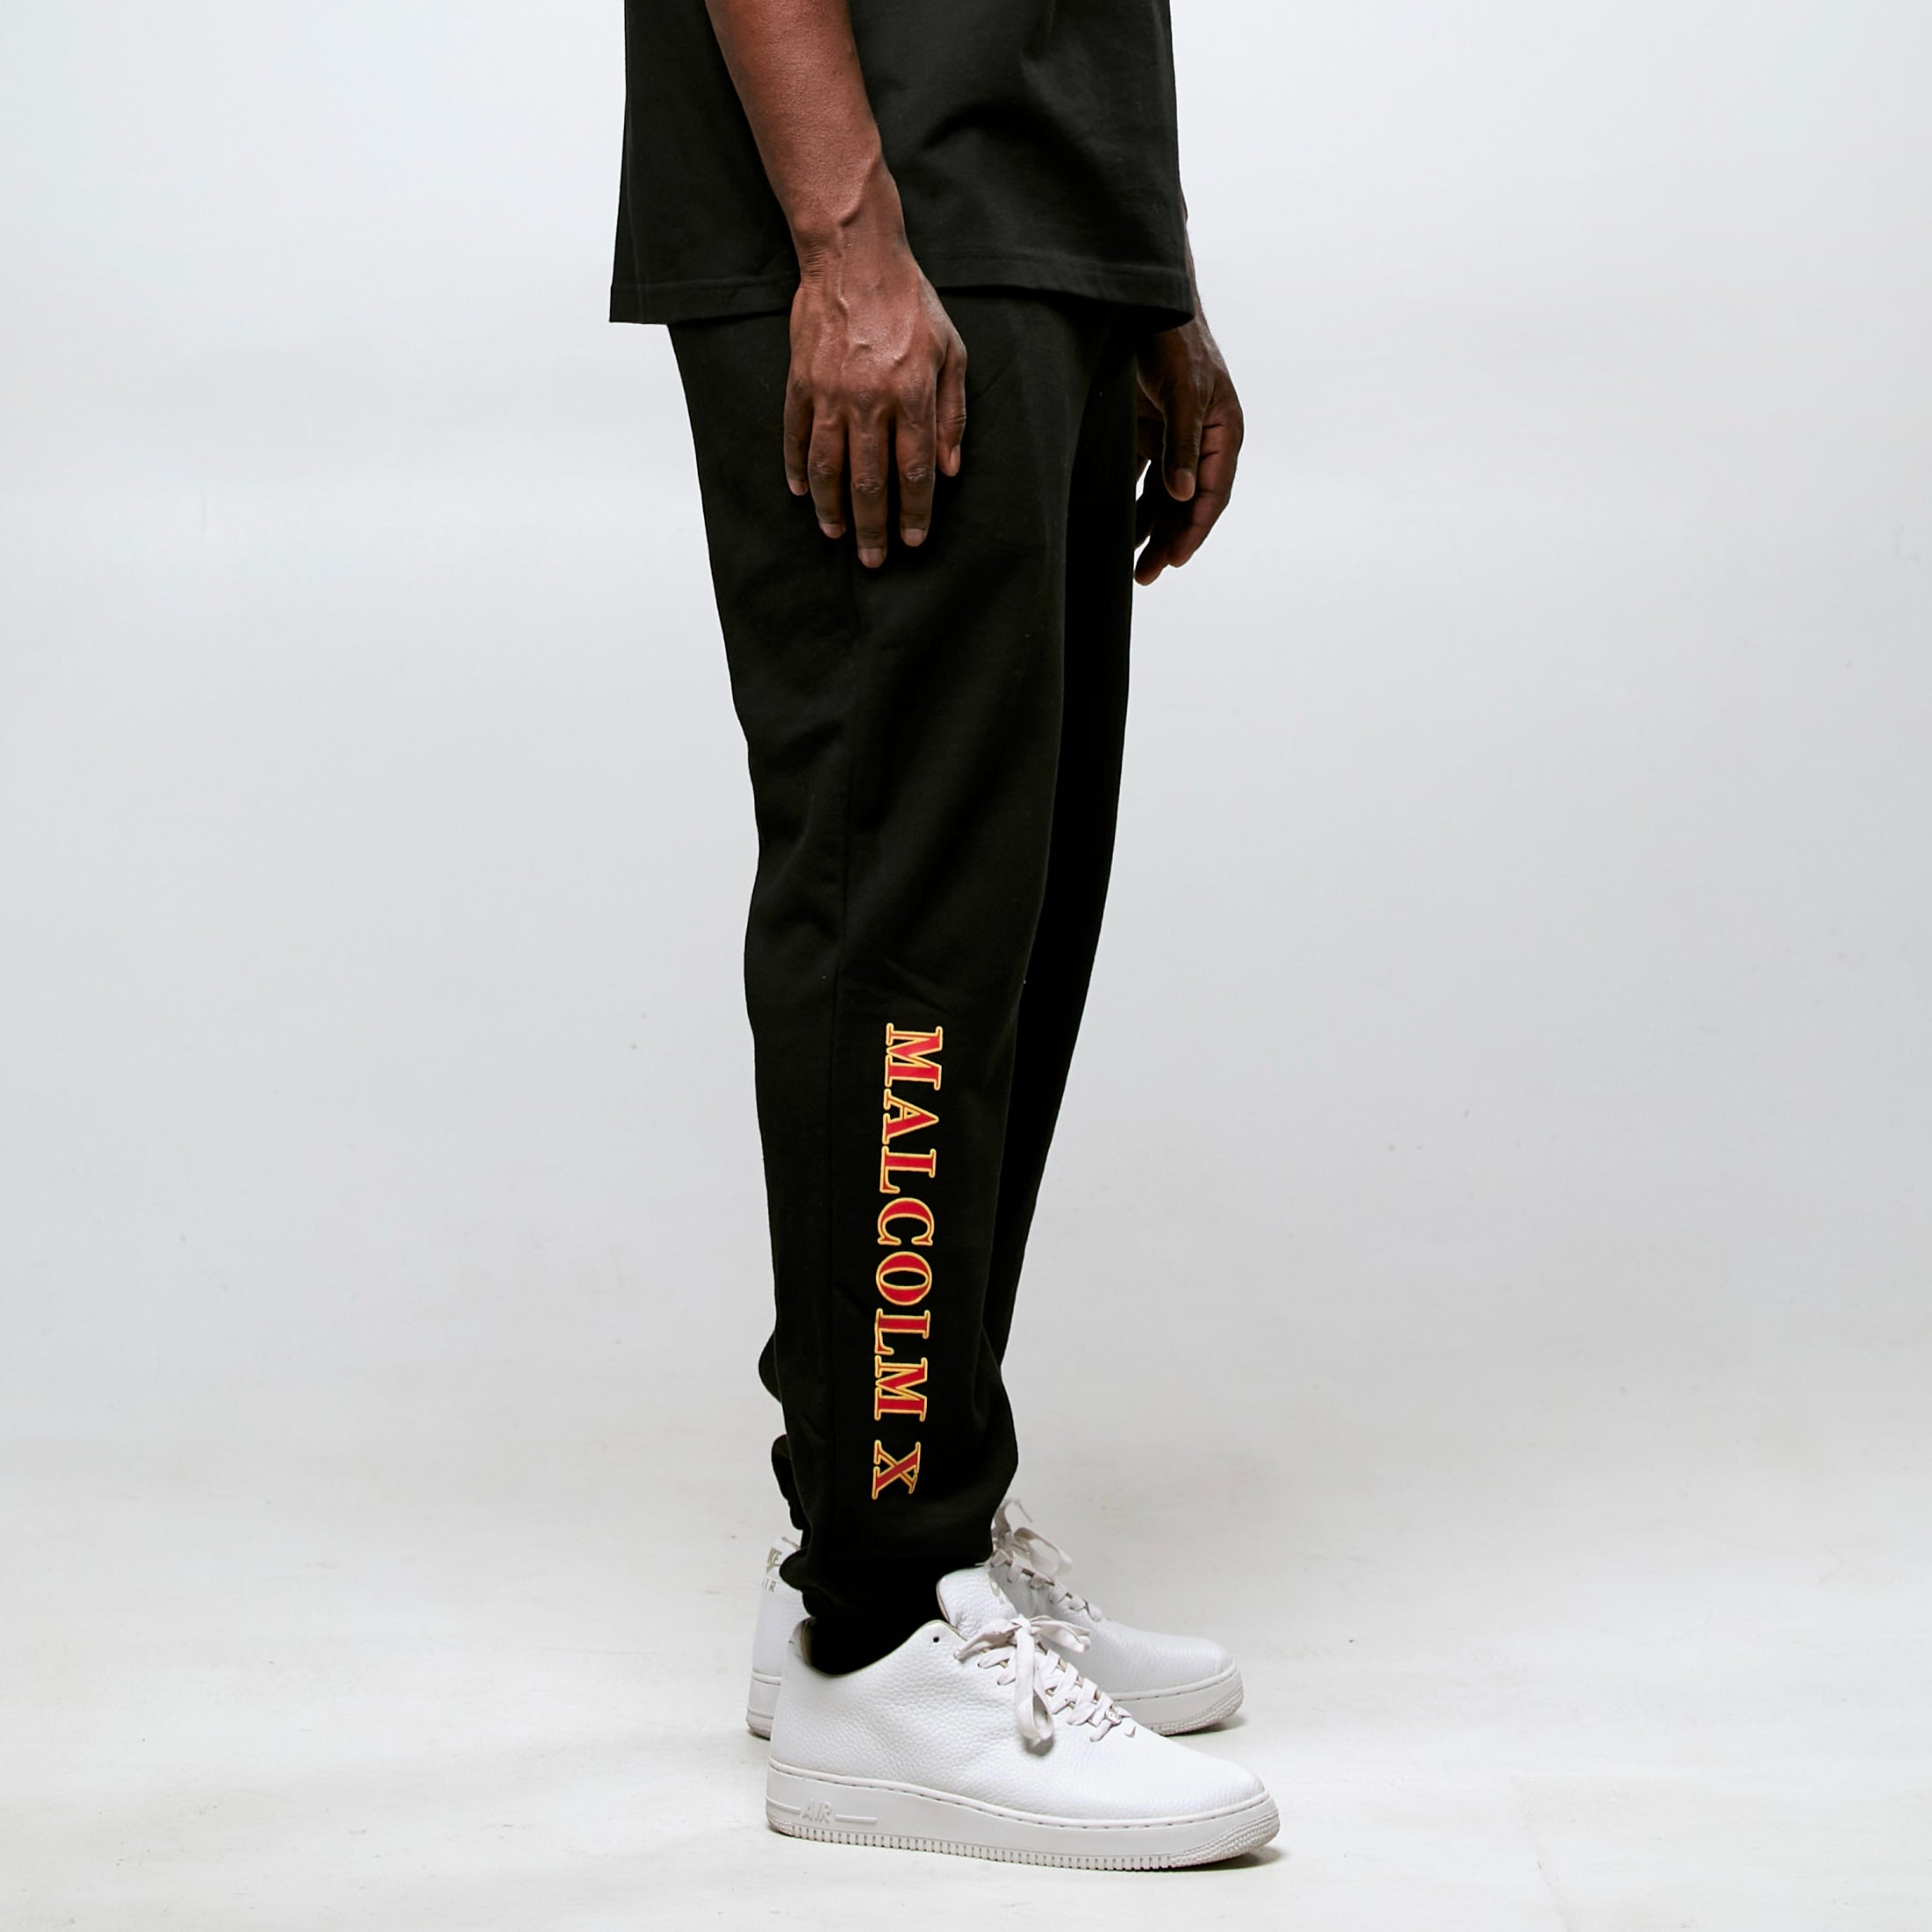 TRACK PANT LEGACY Track Pants - Made in italy - Gender Neutral - Diadora  Online Store US